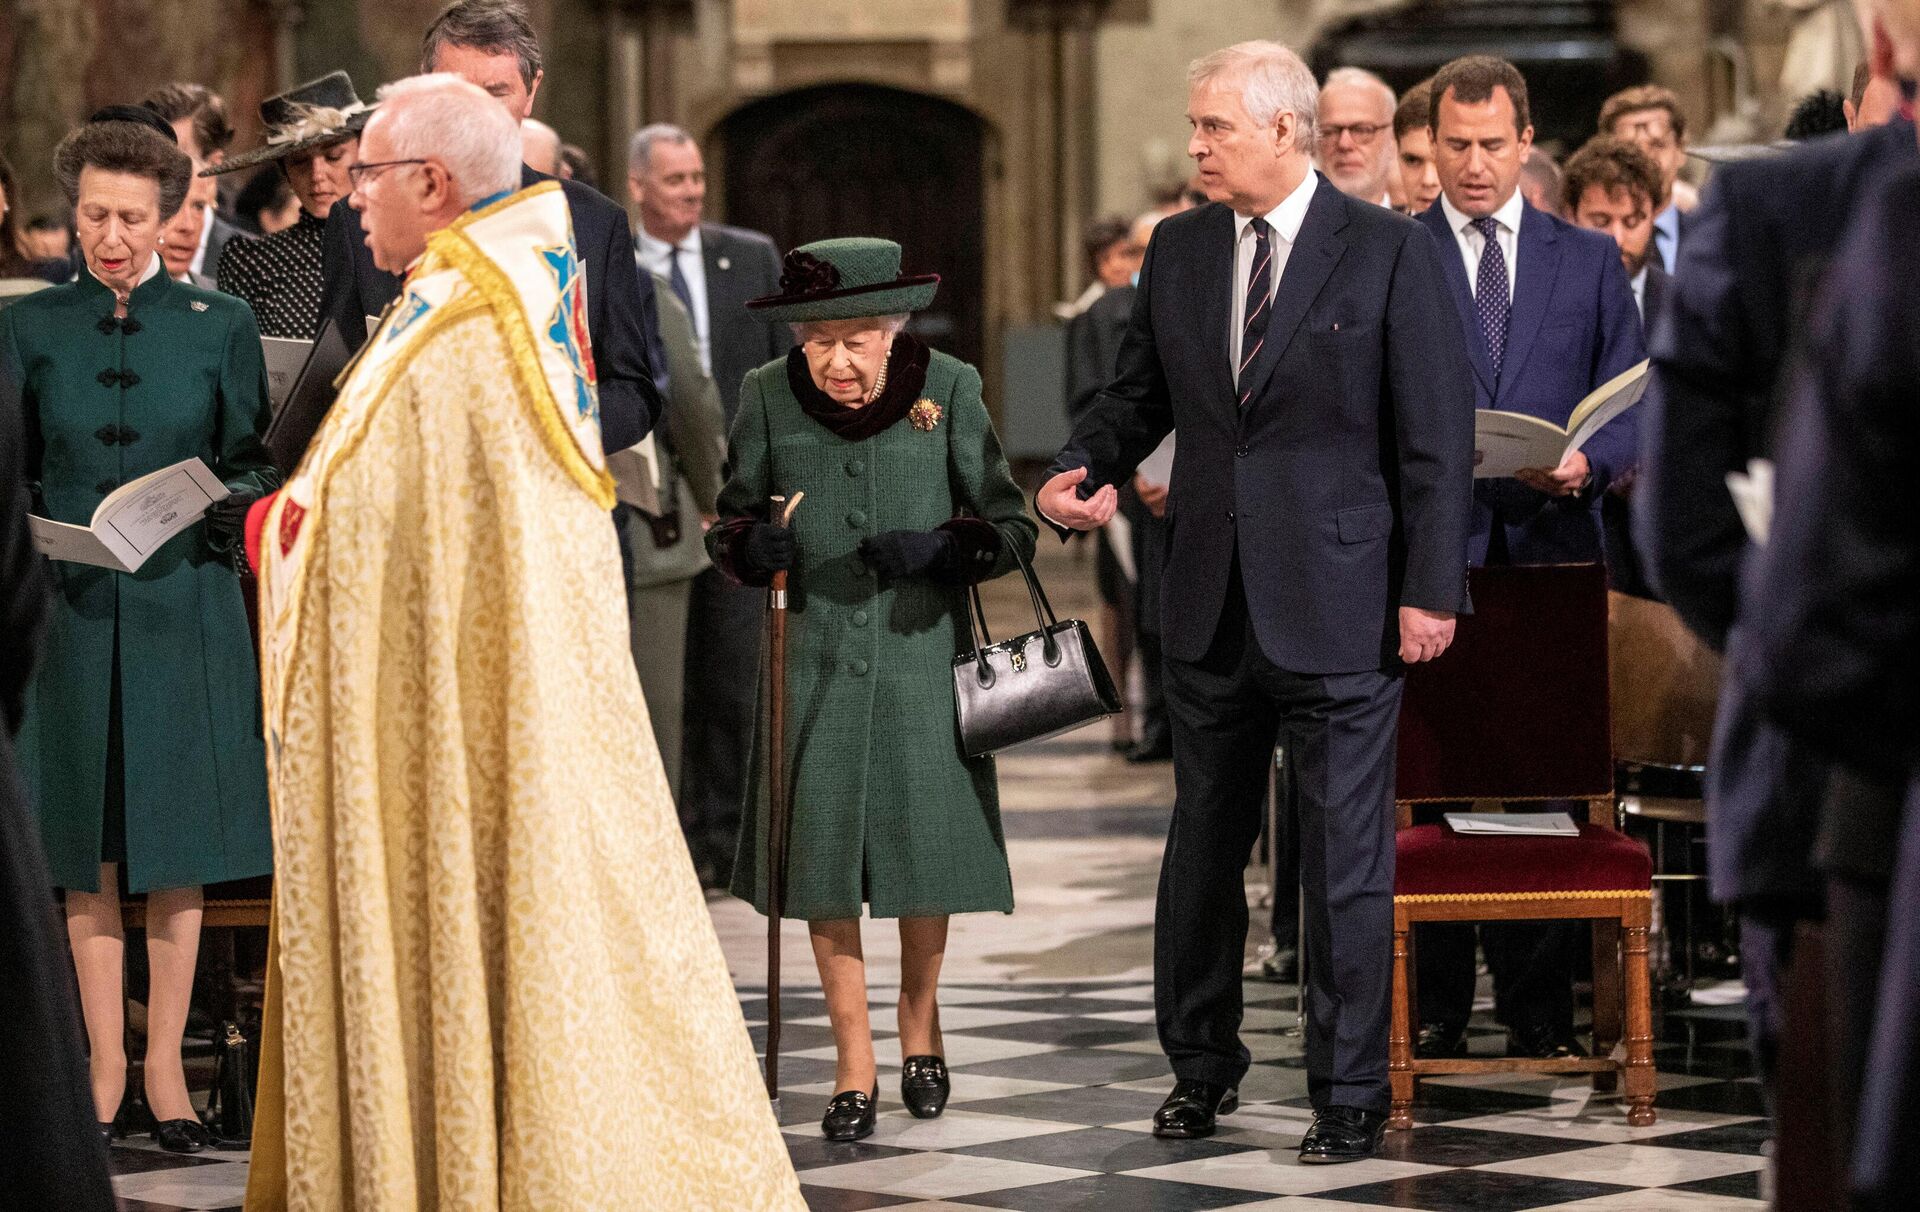 Britain's Queen Elizabeth, accompanied by Prince Andrew, Duke of York, attends a service of thanksgiving for late Prince Philip, Duke of Edinburgh, at Westminster Abbey in London, Britain, March 29, 2022 - Sputnik International, 1920, 01.04.2022